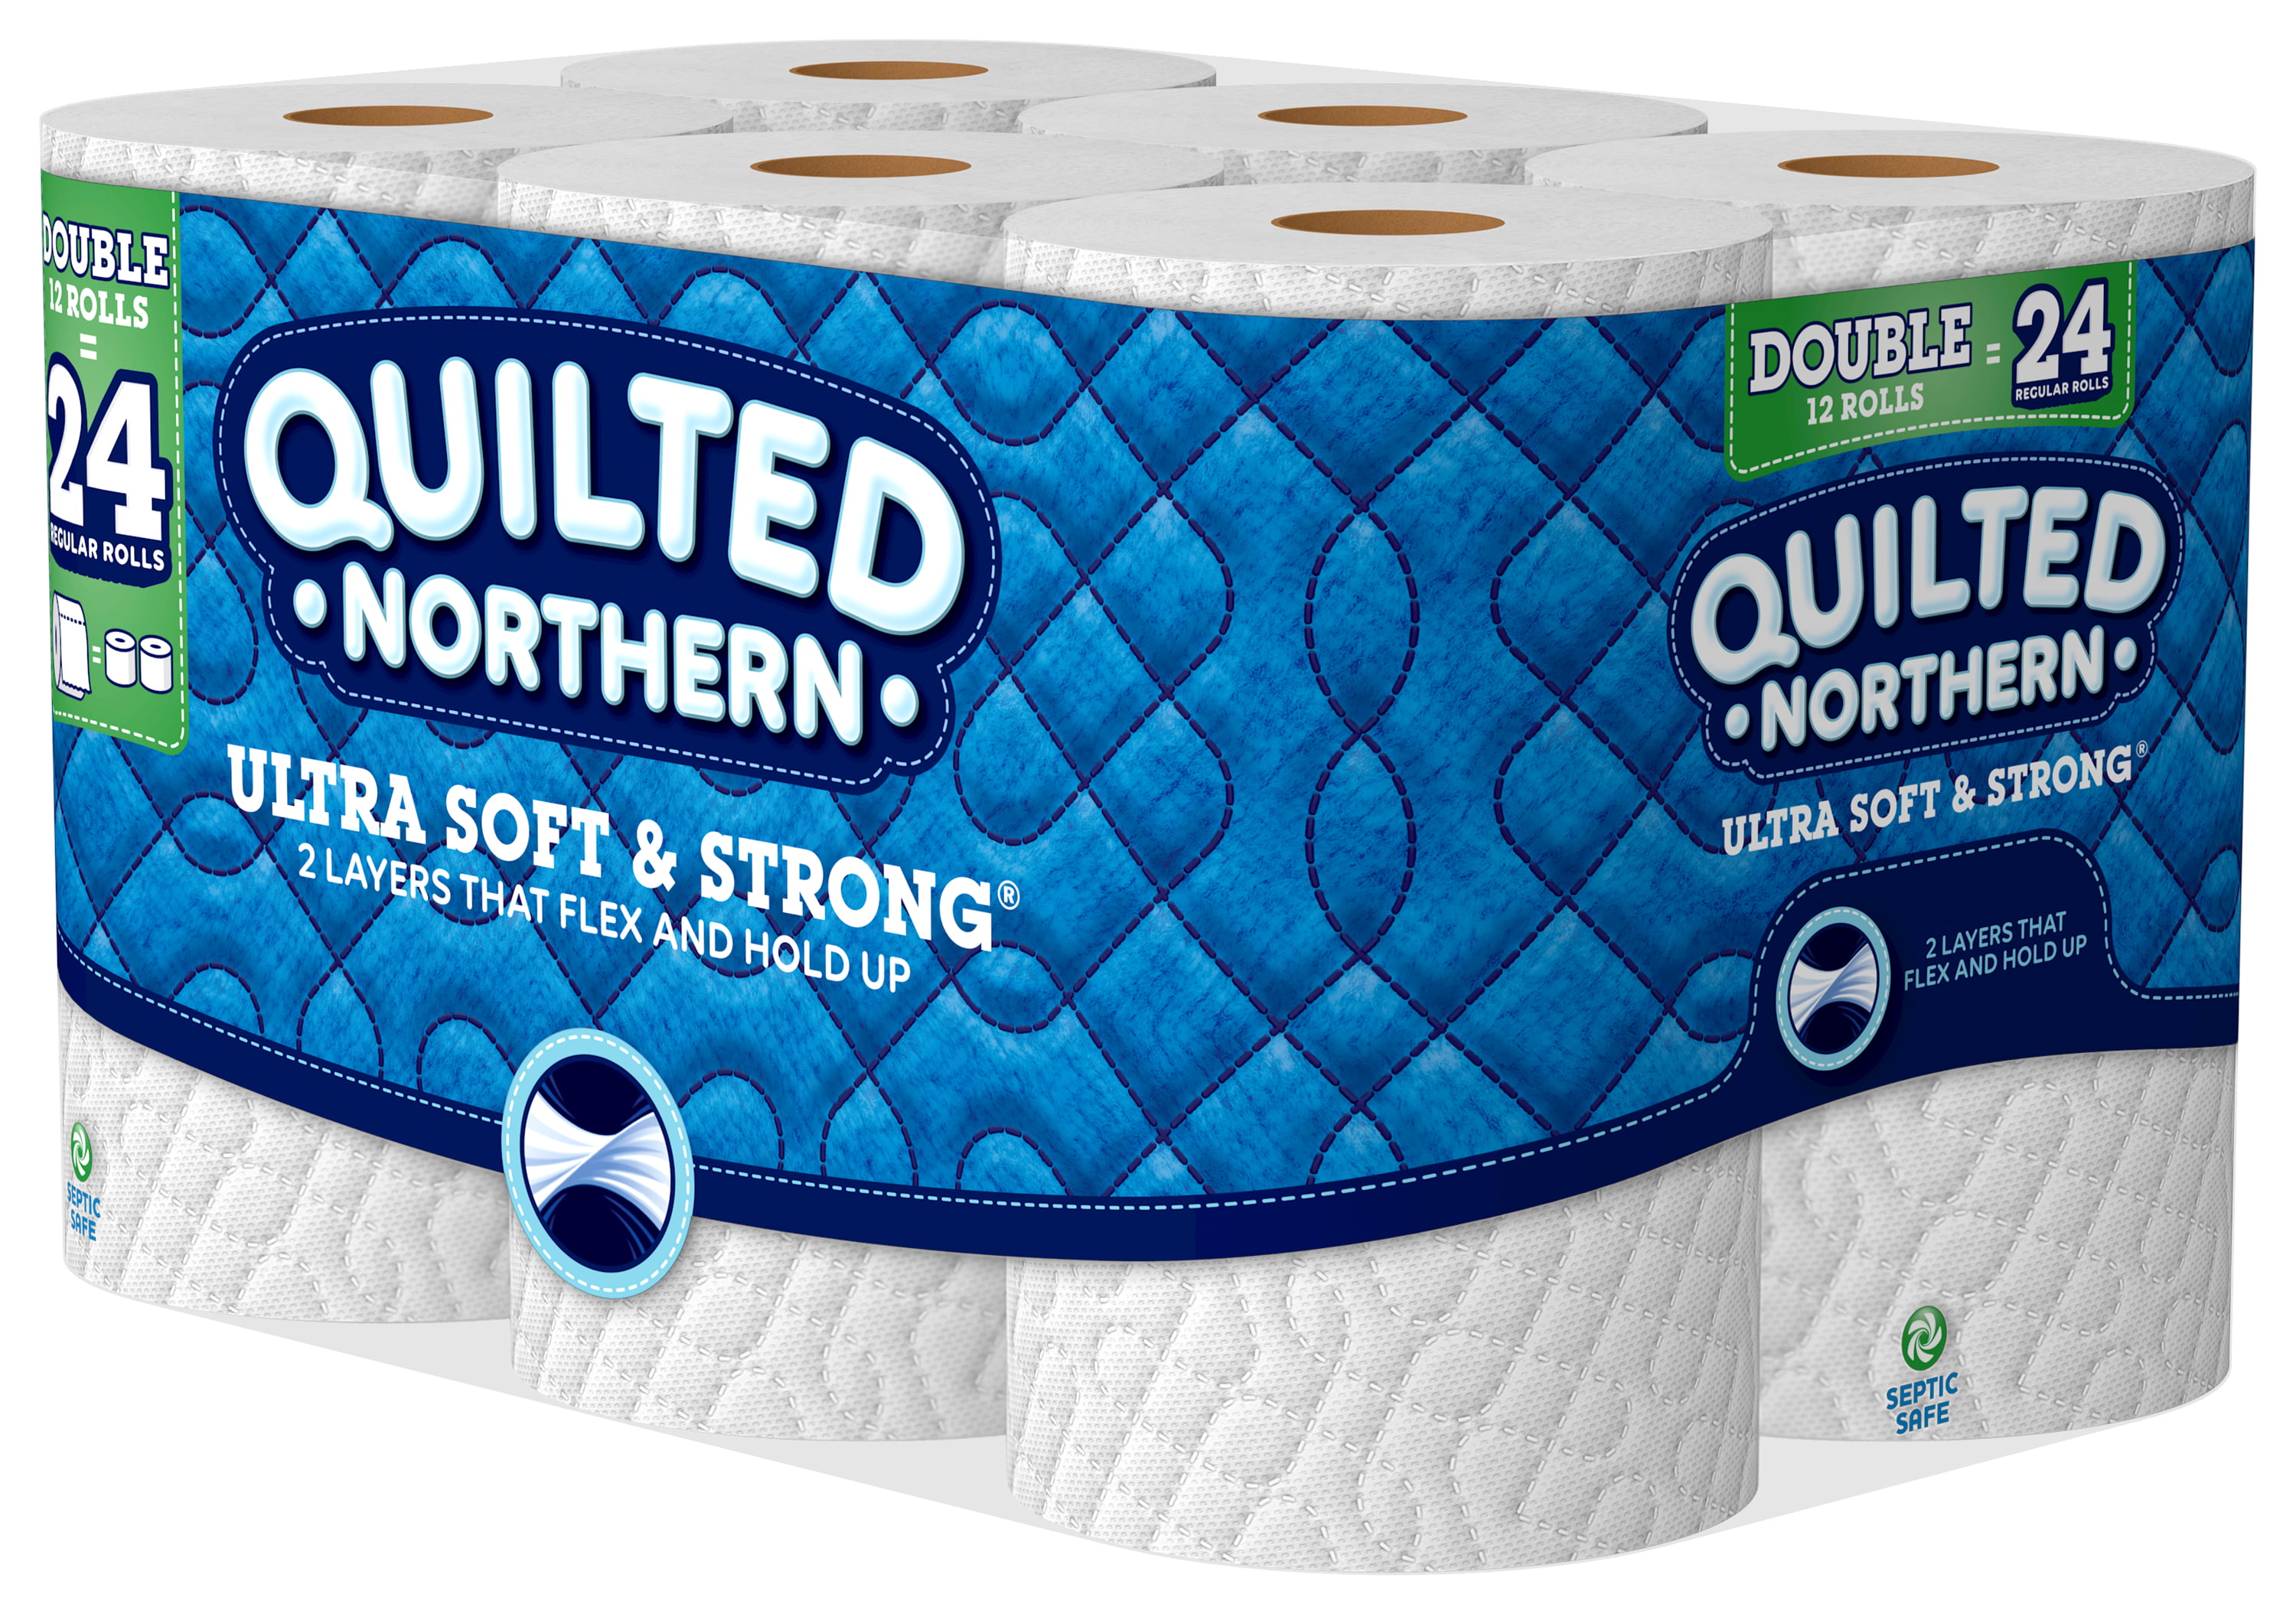 Quilted Northern Ultra Soft & Strong Toilet Paper (6 Double Rolls) -  Bliffert Lumber and Hardware